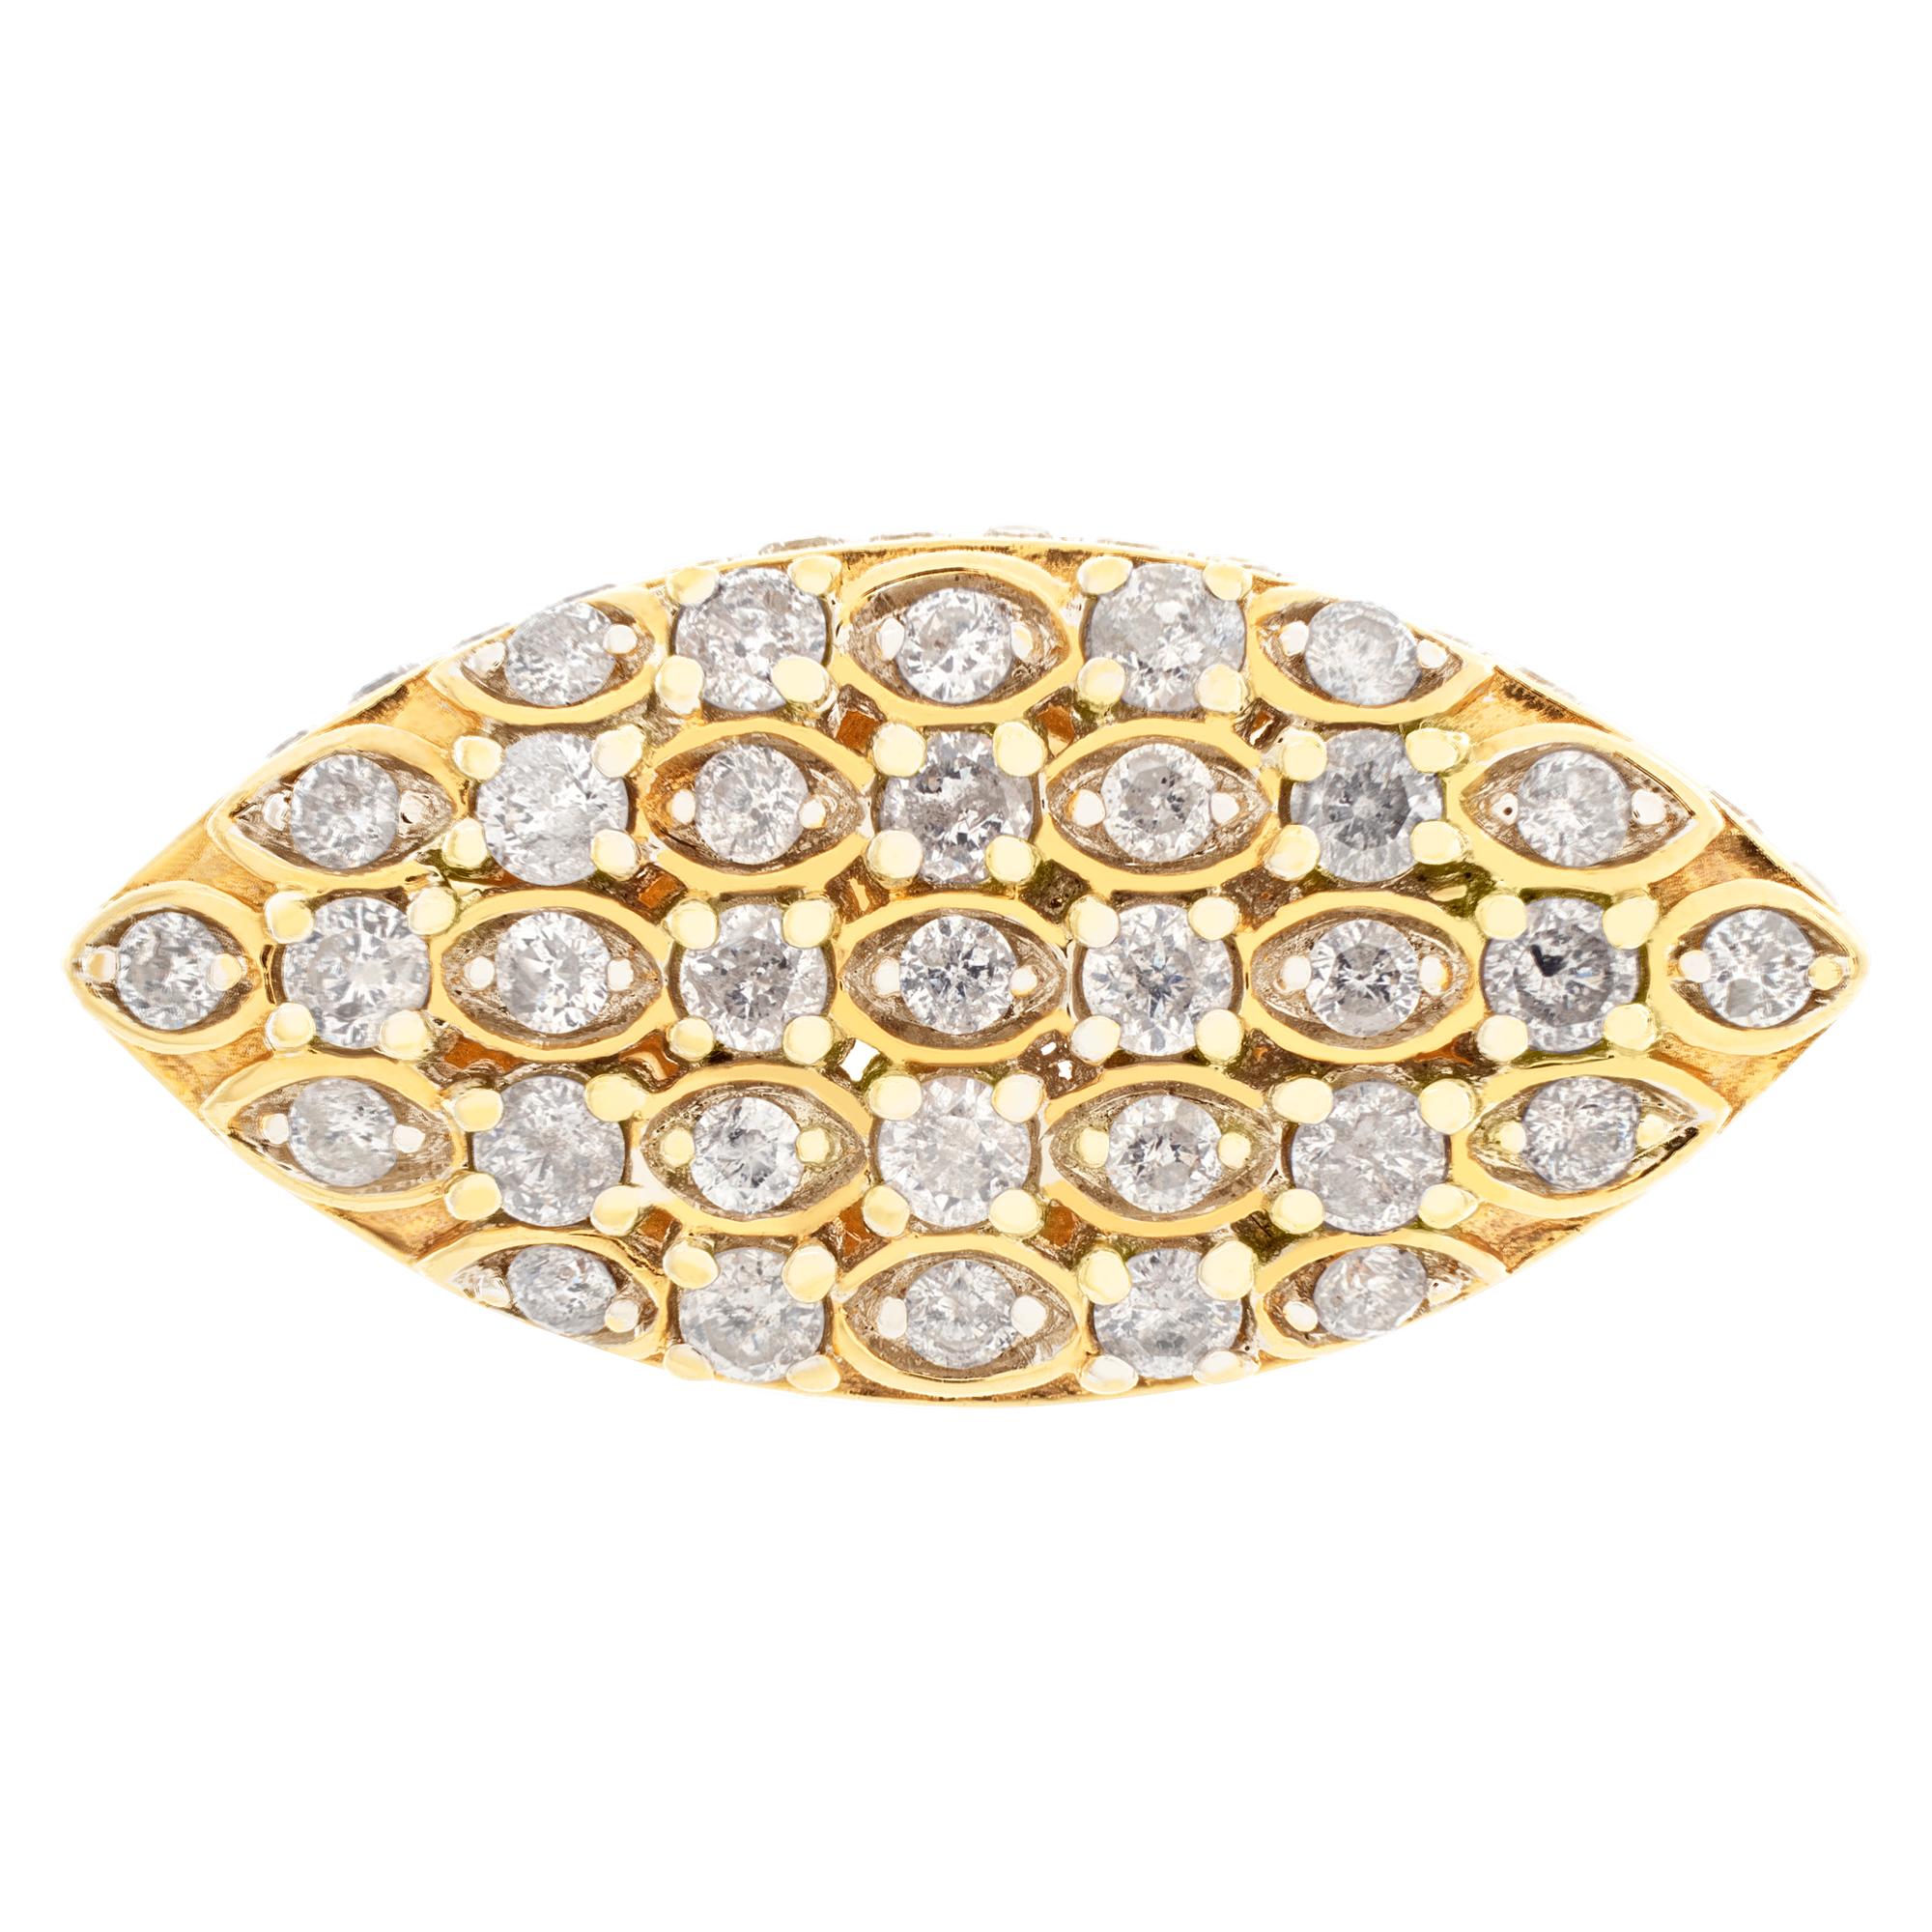 Oval Diamond ring in 14k yellow gold with approximately  0.93 carats in pave set diamonds. Size 7.This Diamond ring is currently size 7 and some items can be sized up or down, please ask! It weighs 3.5 pennyweights and is 14k.
